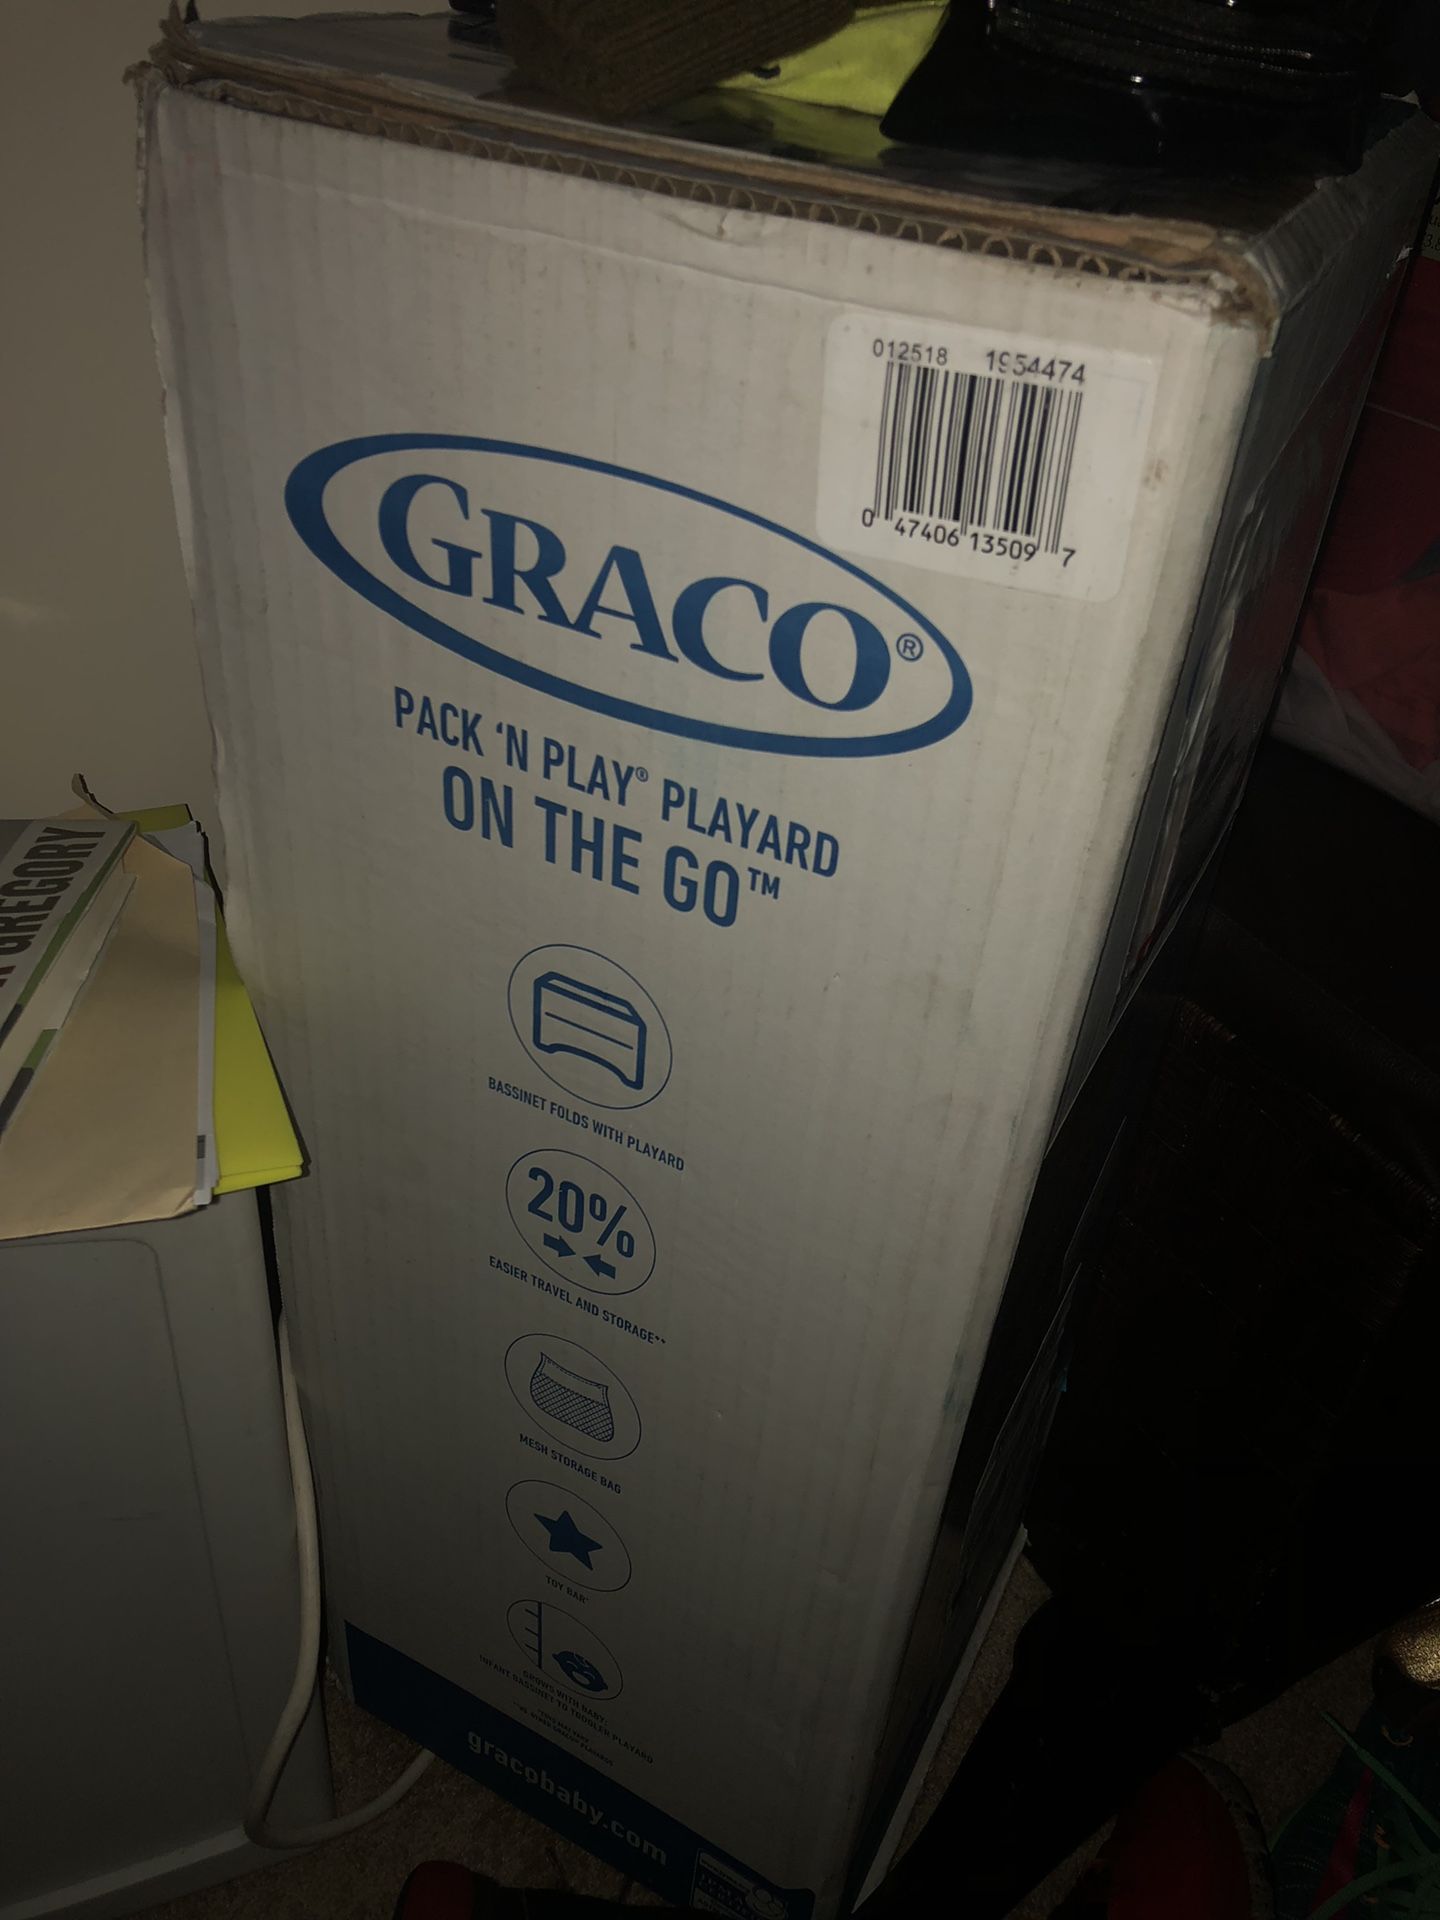 Graco pack and play on the go